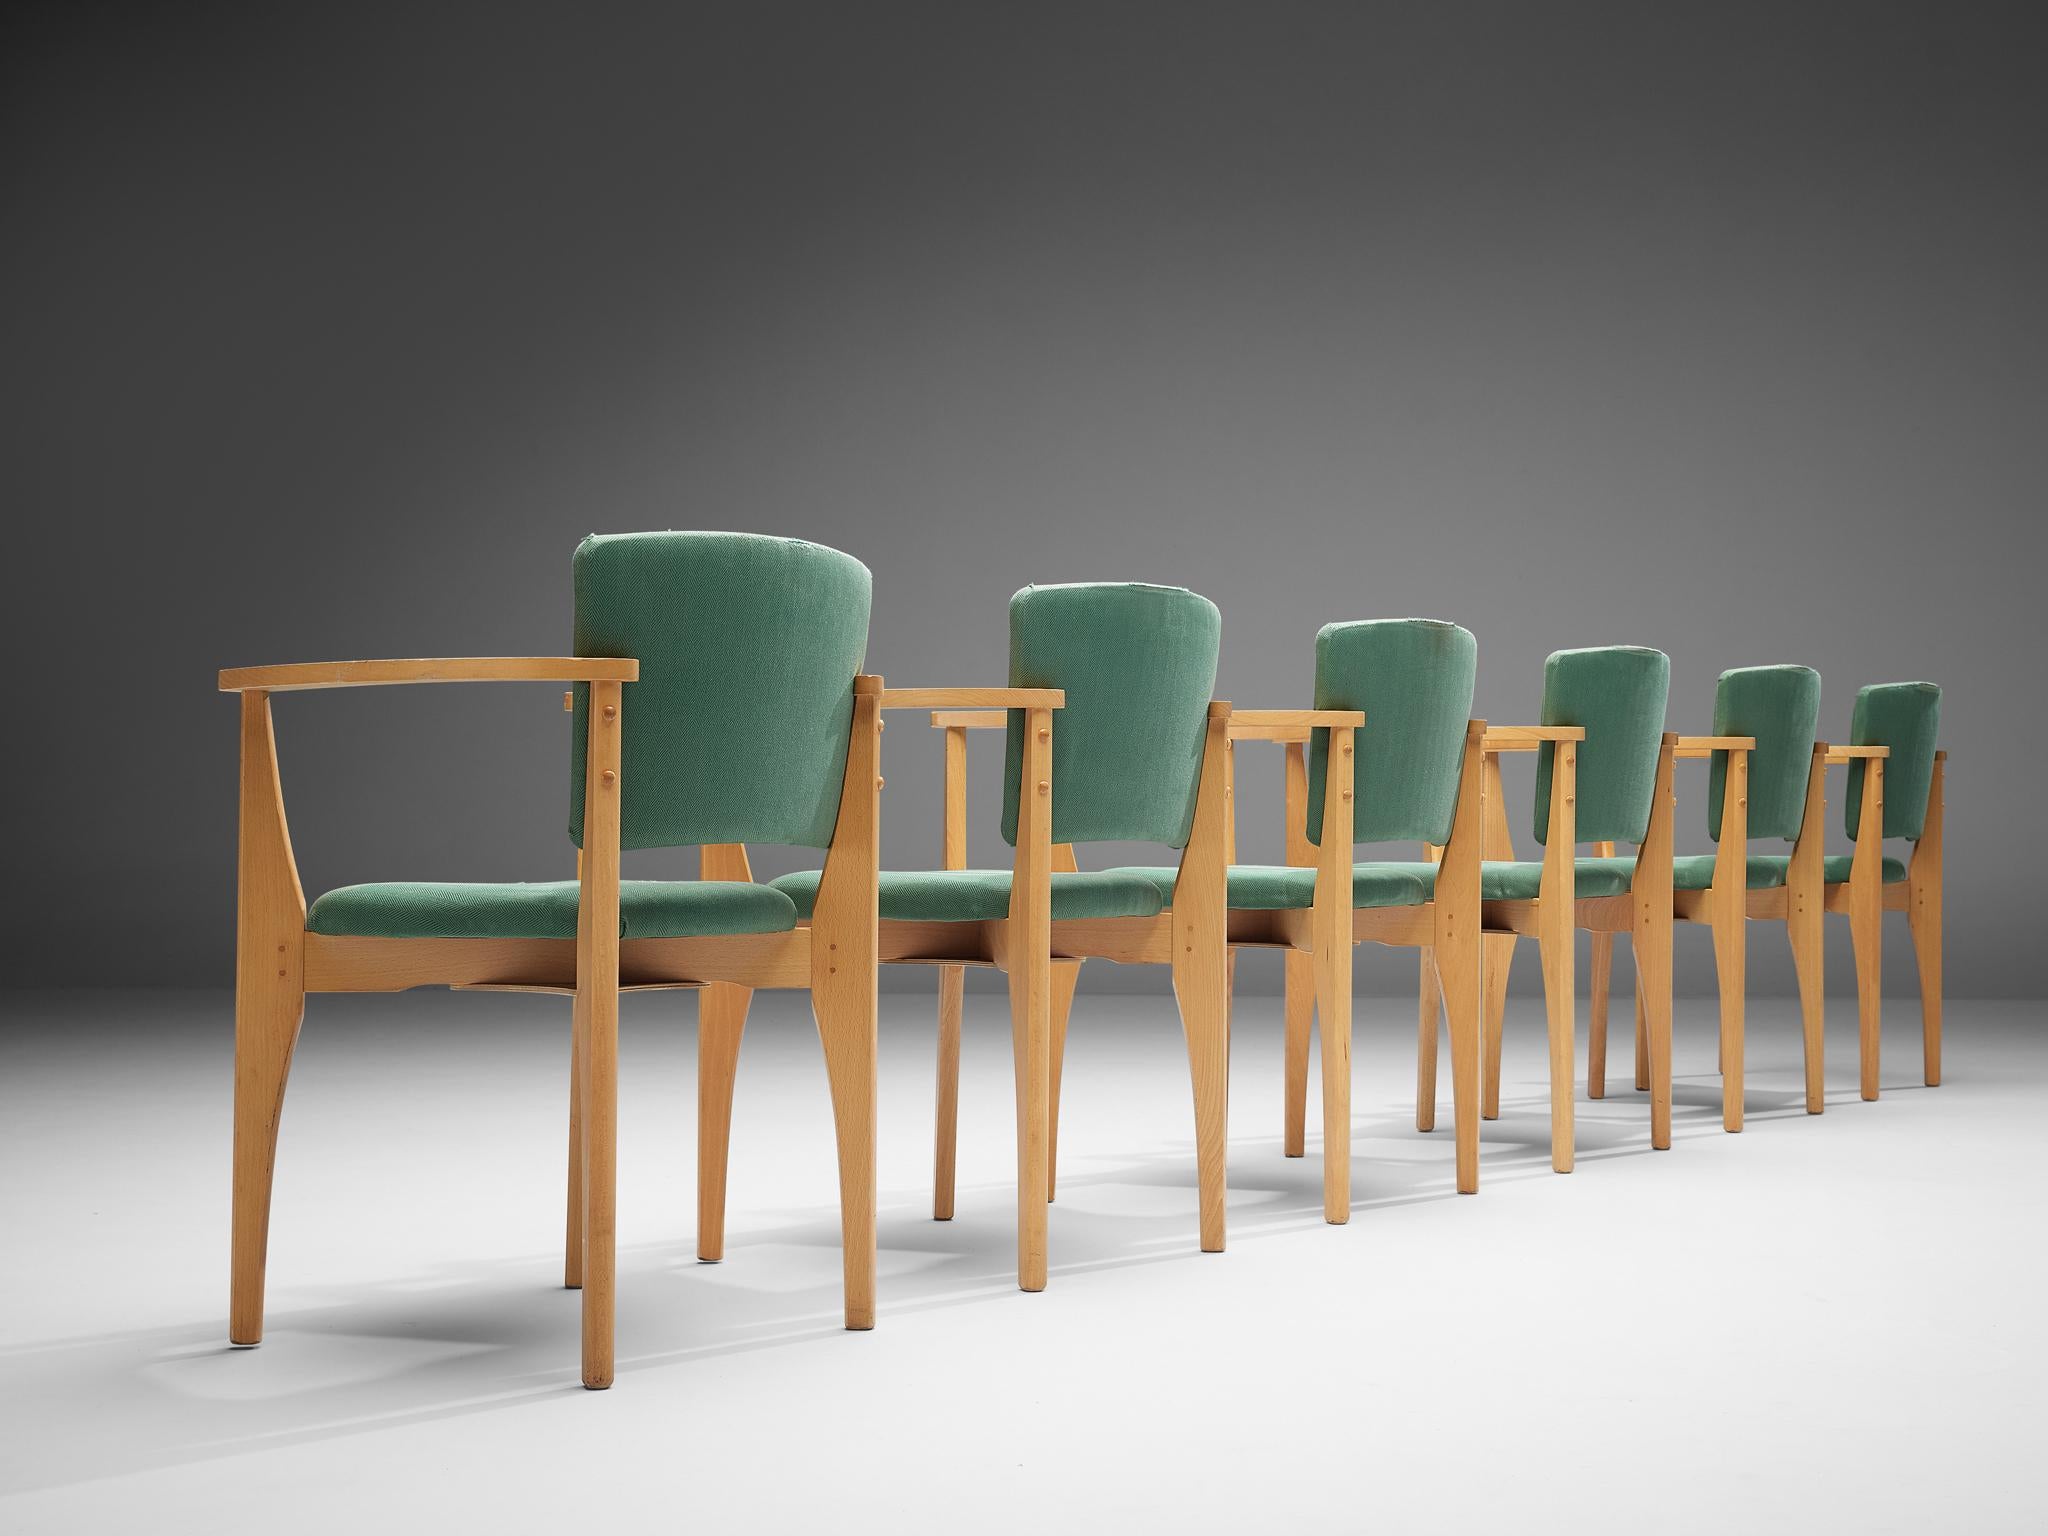 Set of SIX dining chairs, beech, fabric, Europe, 1960s

Set of SIX dining chairs, made in Europe in the 1960s. These dining chairs feature frames in a light beech wood. They show rounded armrests that are connected to the legs in front and at the